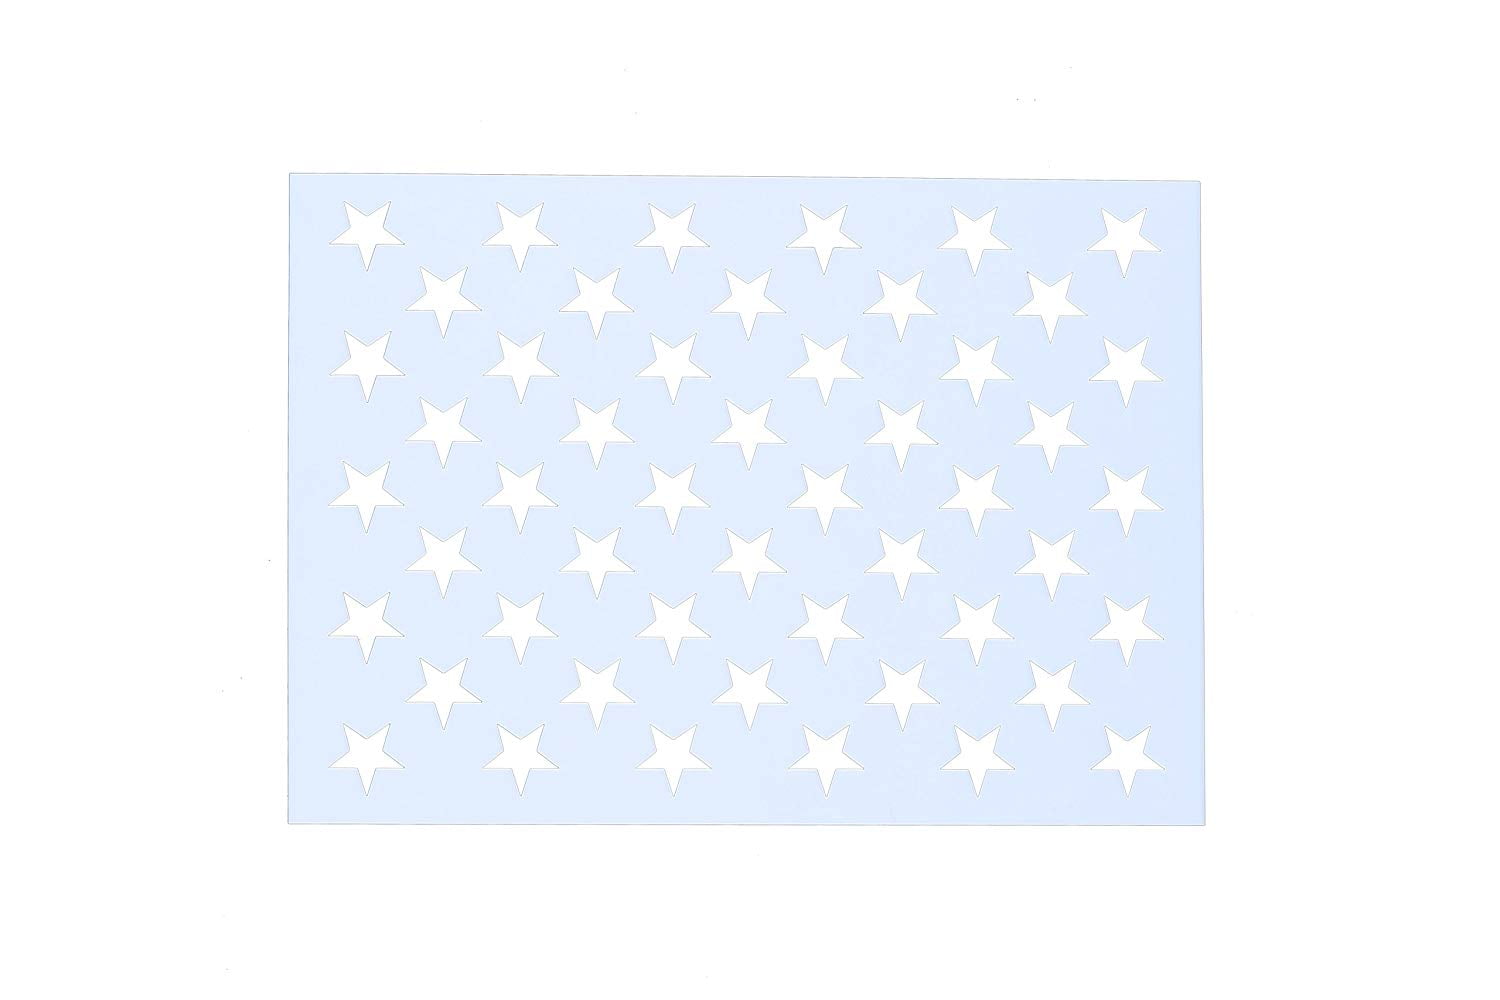 Star Stencil American Flag Star Stencil 50 Stars 9pcs Plastic Leaflai for Painting on Wood/DIY Drawing Painting Craft Projects/Fabric/Airbrush/Reusable Stencil 3 Large 3 Medium 3 Small 